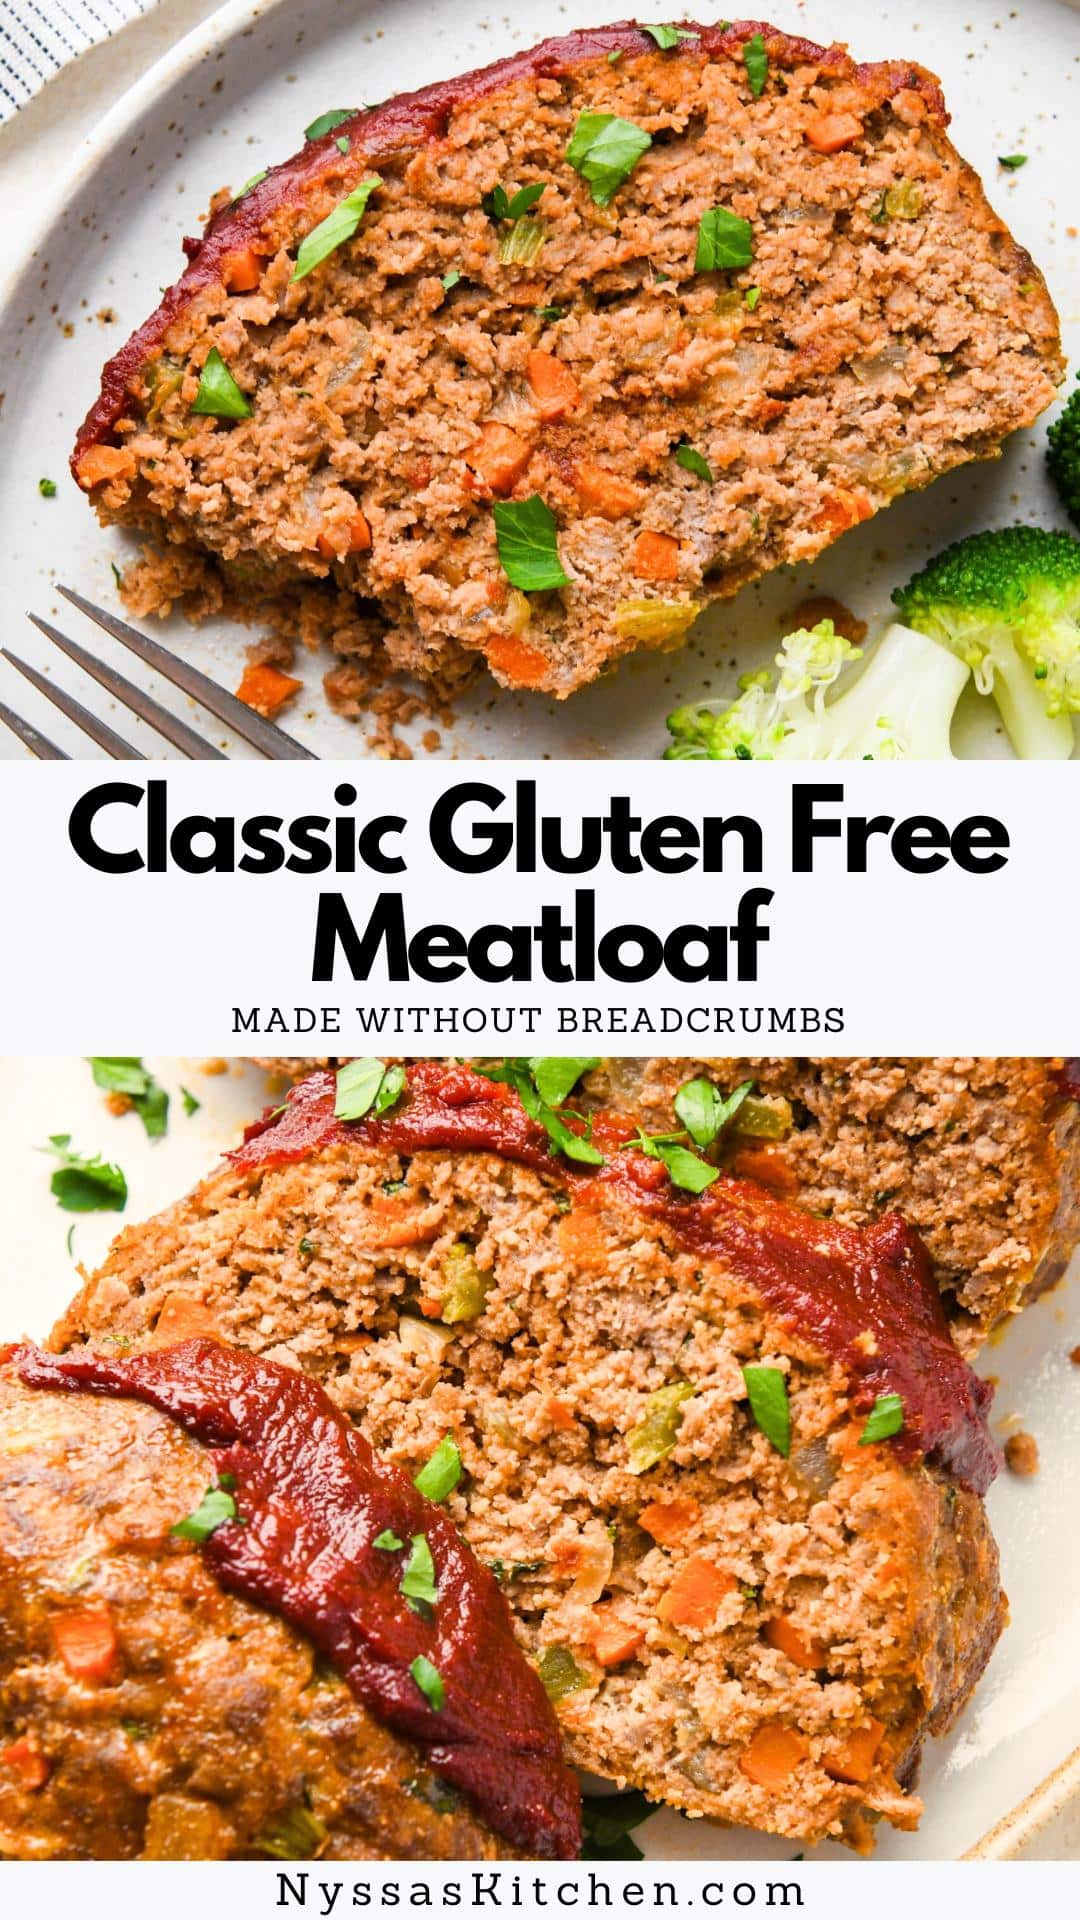 This classic gluten free meatloaf is the ultimate healthy comfort food! Made with all the traditional meatloaf ingredients and flavors you love but without any dairy, gluten, or sugar in the glaze. An easy recipe using ground beef and ground pork (or just ground beef!) that makes delicious leftovers. Kid friendly and perfect for the whole family! Recipe is dairy free, paleo friendly, Whole30 compatible, and grain free.